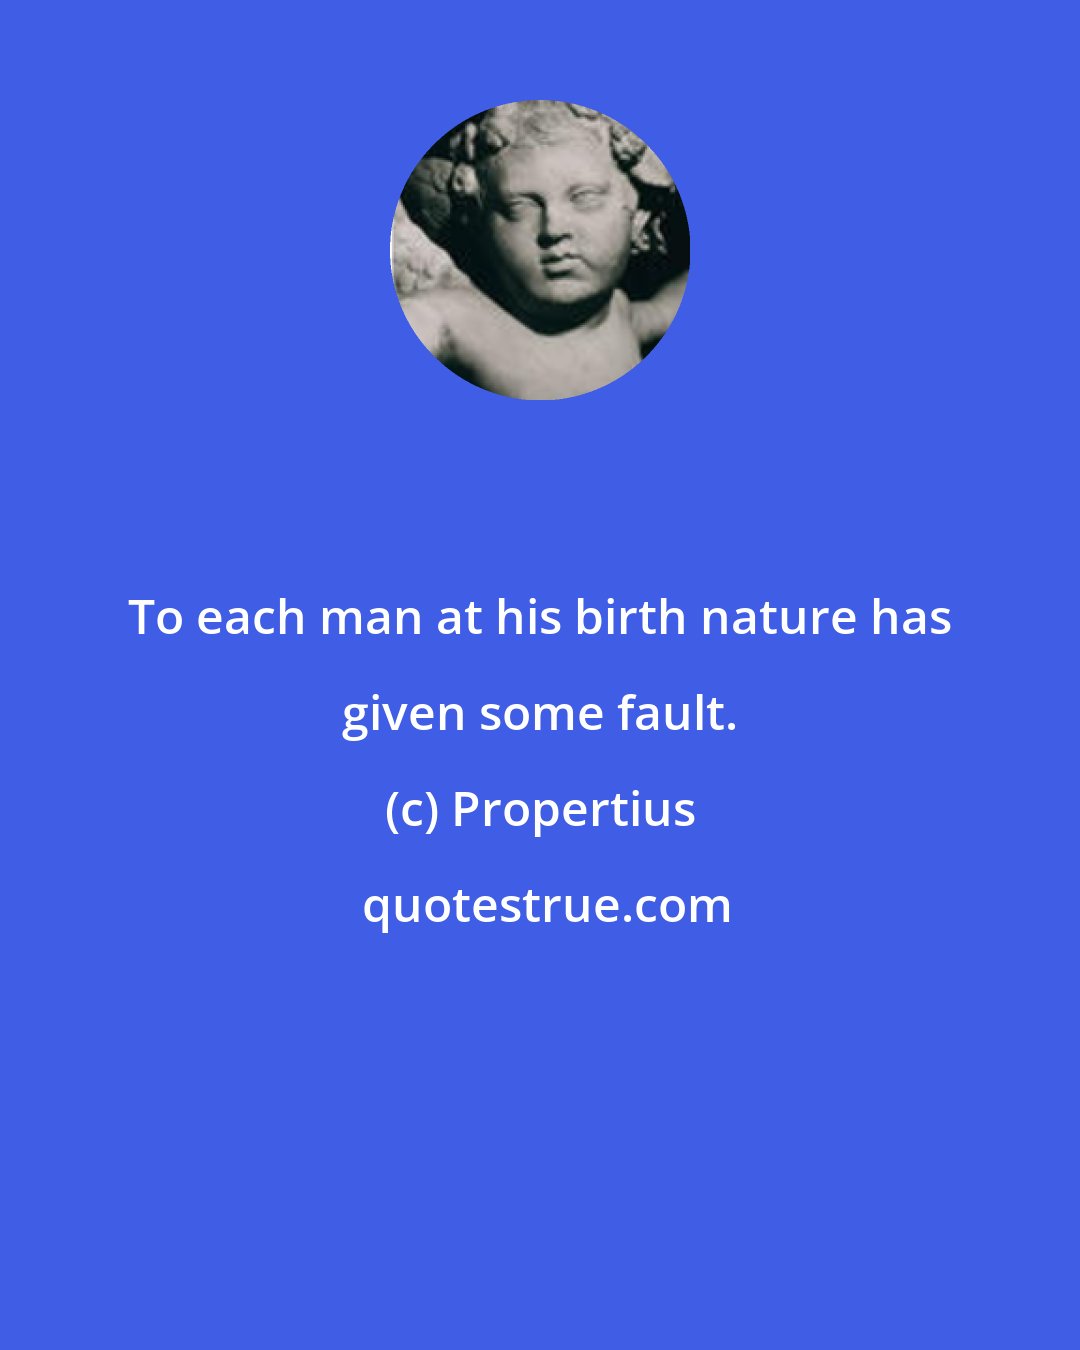 Propertius: To each man at his birth nature has given some fault.